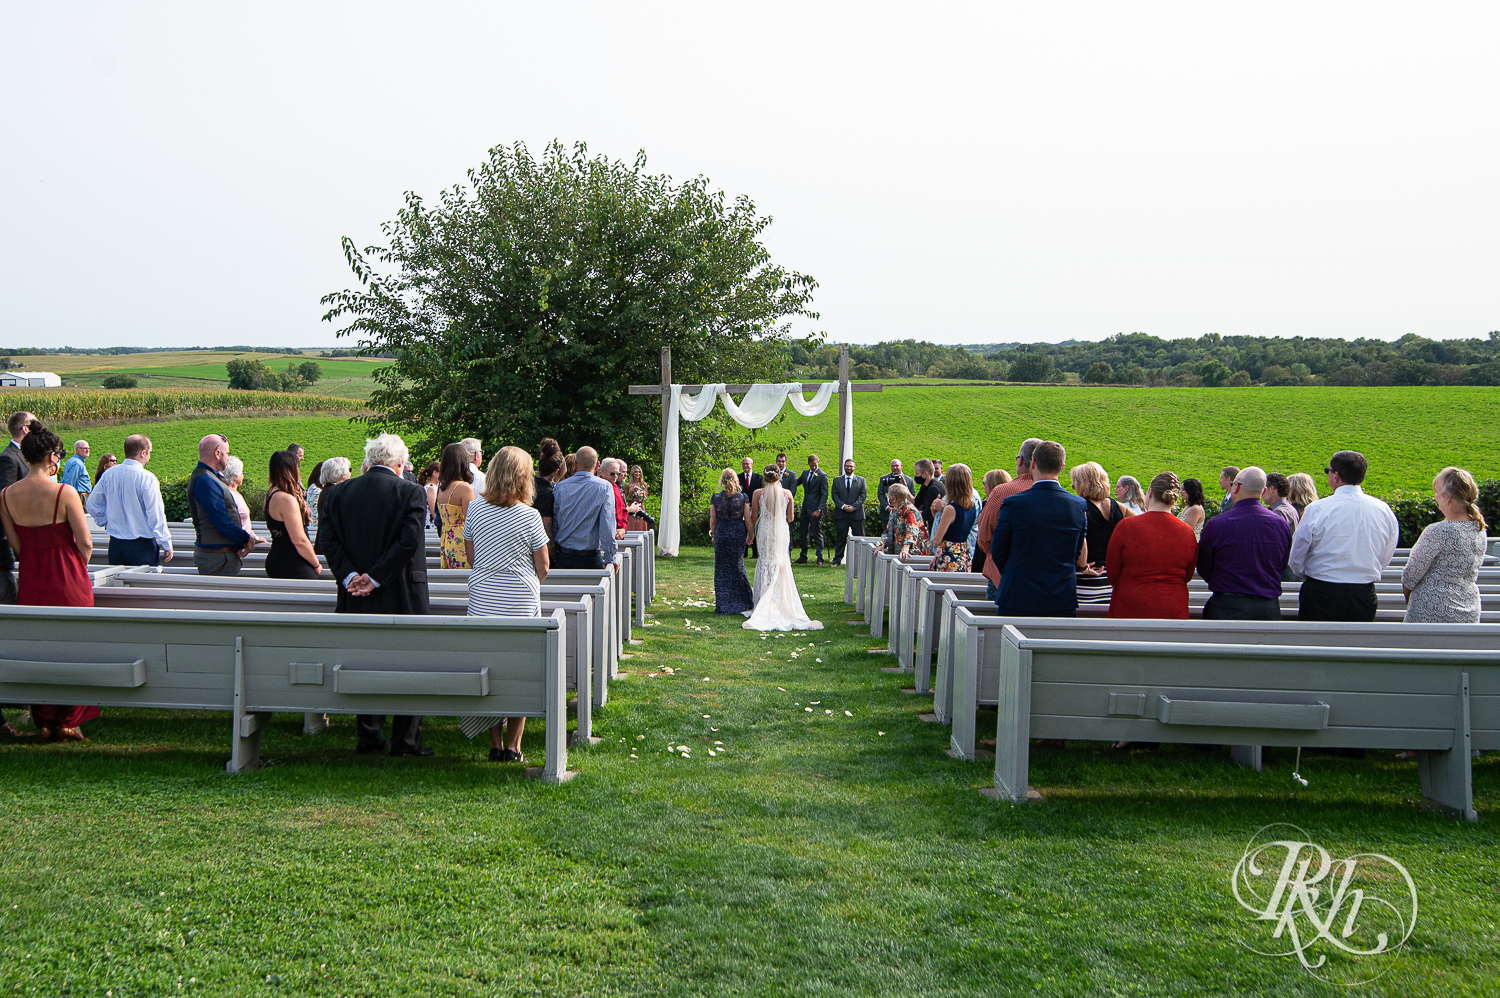 Bride walks down the aisle with mom during wedding ceremony at Legacy Hills Farm in Welch, Minnesota.